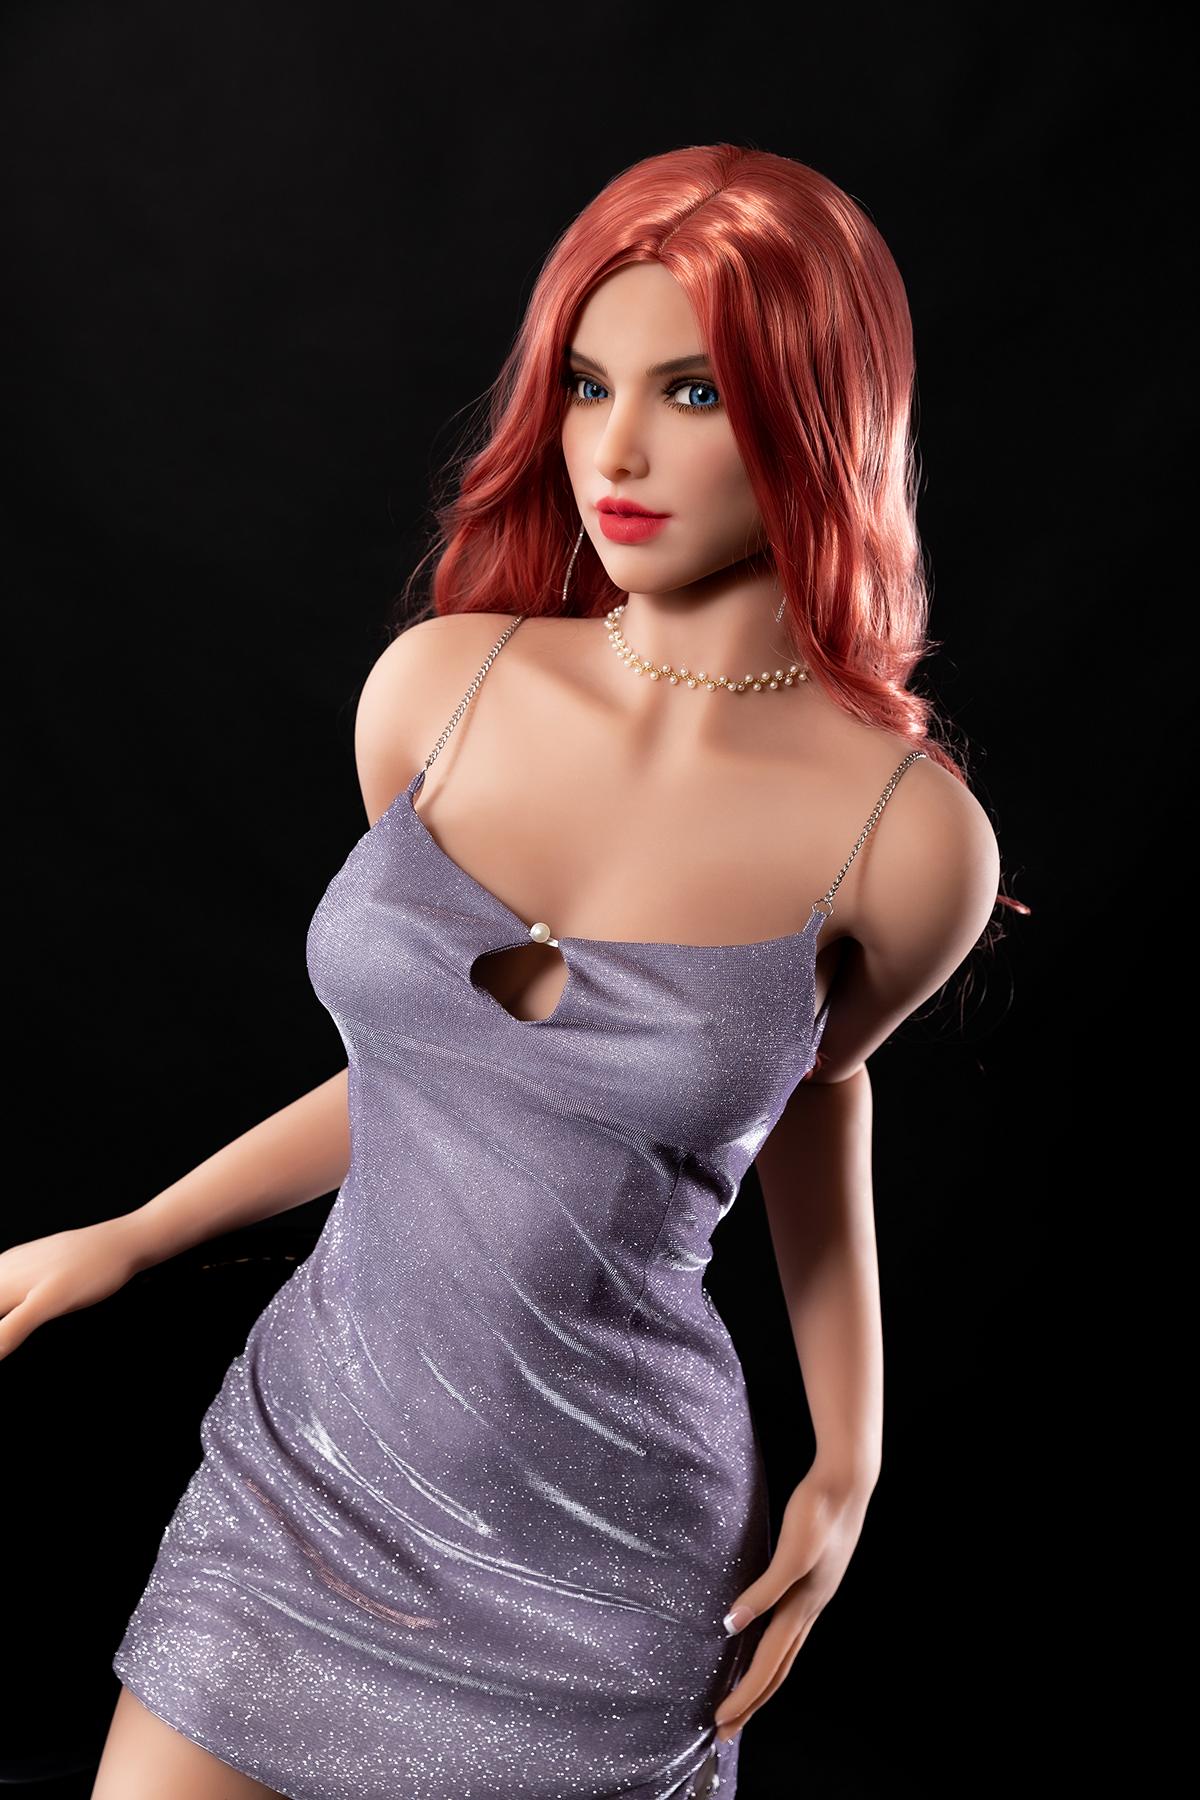 Cheap Sex Doll Holly | The Best Selling Real Doll